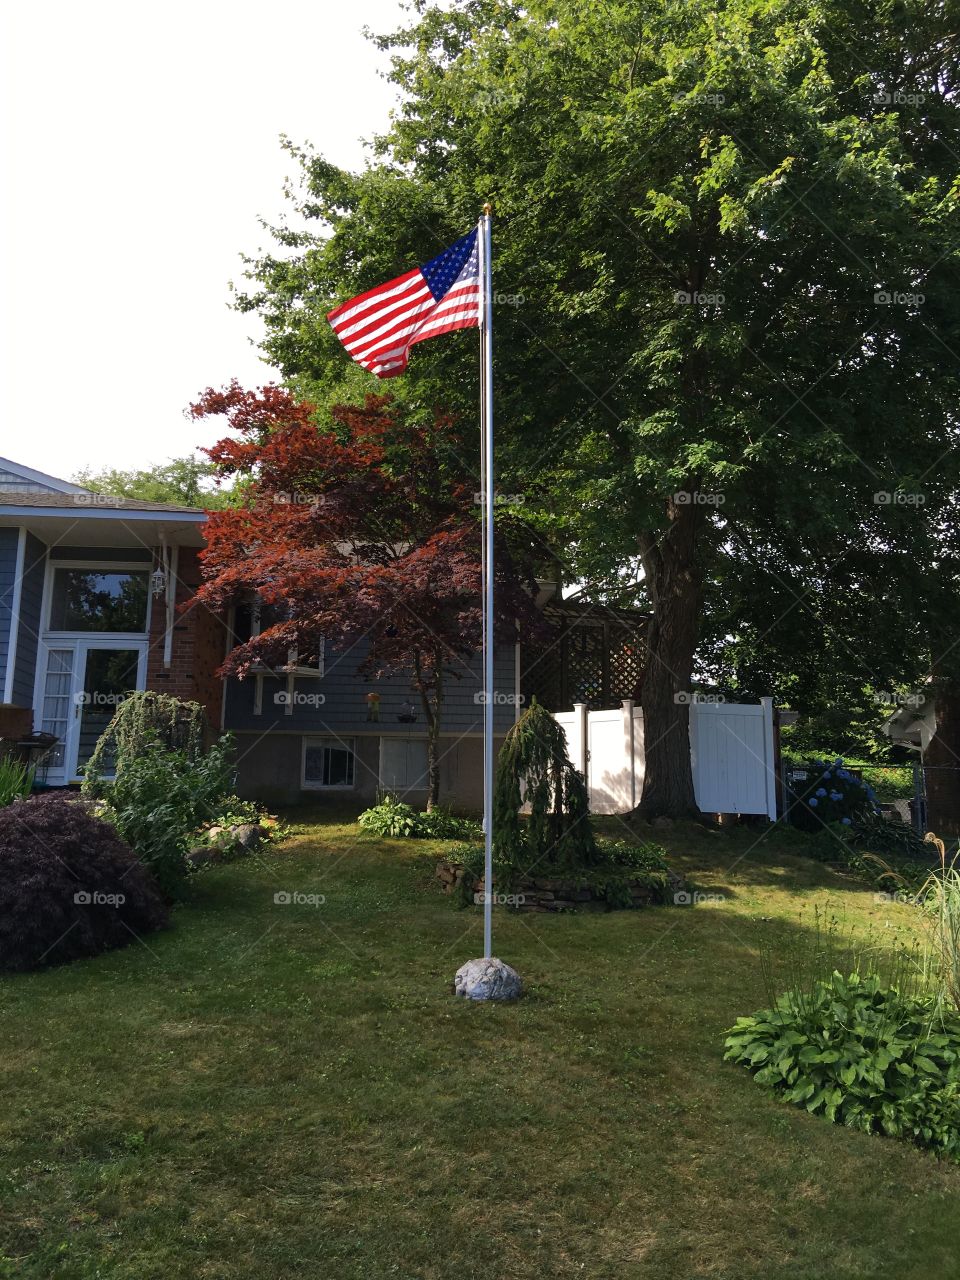 American Flag Day, Born in USA and proud of it, Flag flies at home 24/7